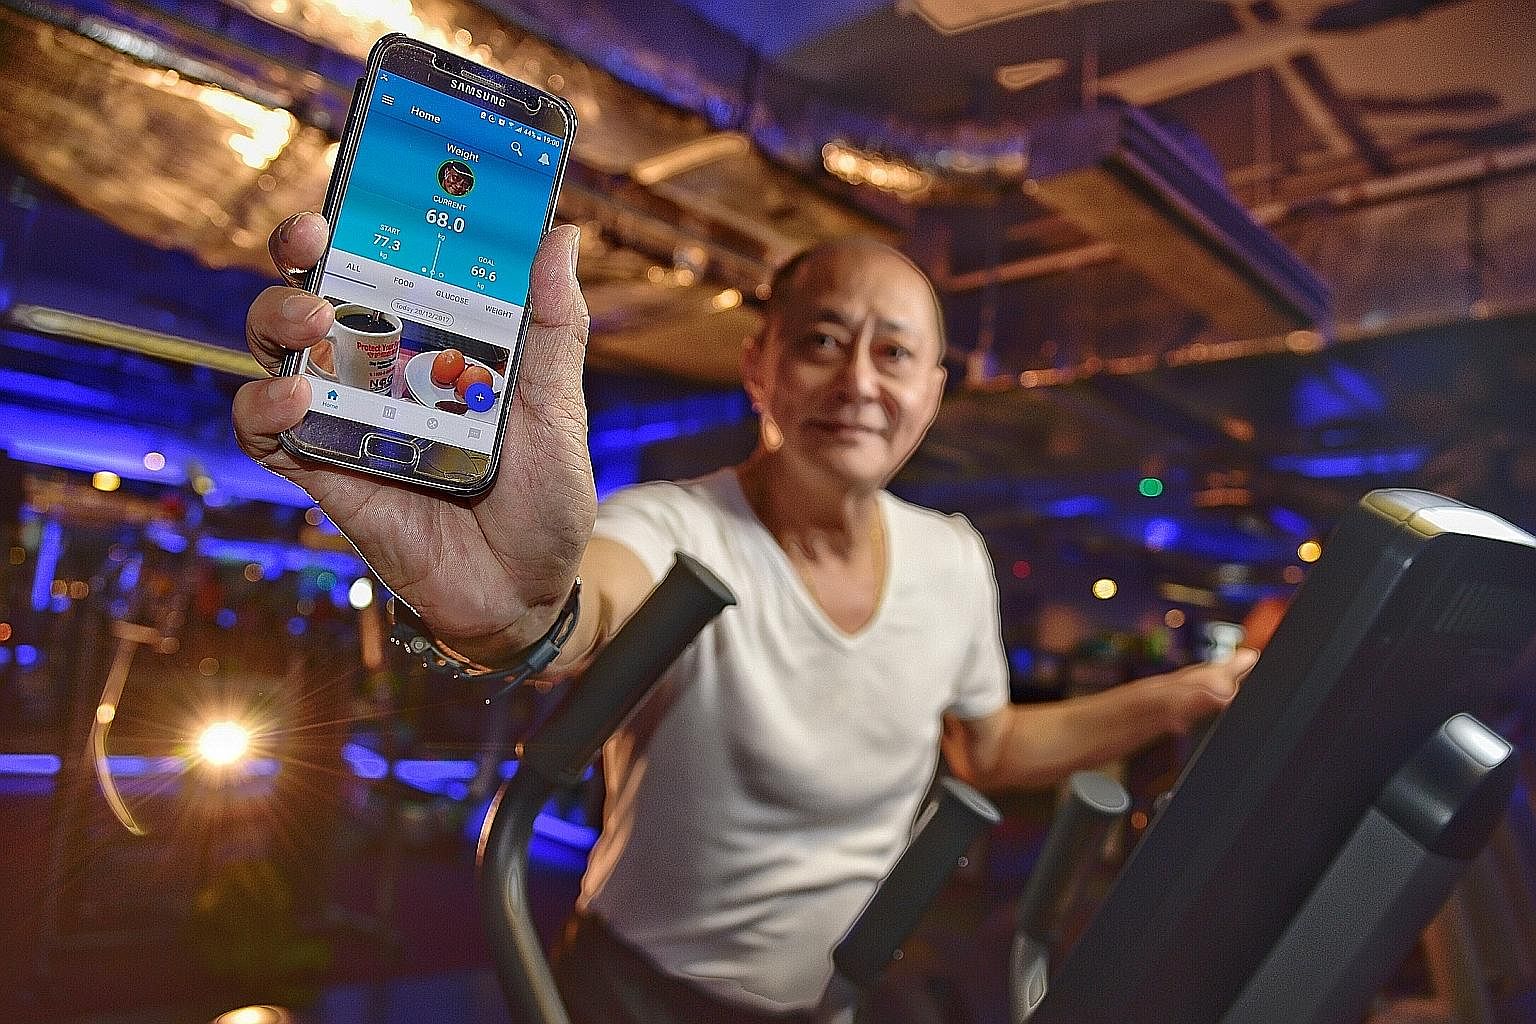 Mr Albert Koh, who is diabetic, lost nearly 10kg with the help of the GlycoLeap app, which has been giving him advice on his meal choices. The app helps diabetics improve their diets by assessing their daily meals.